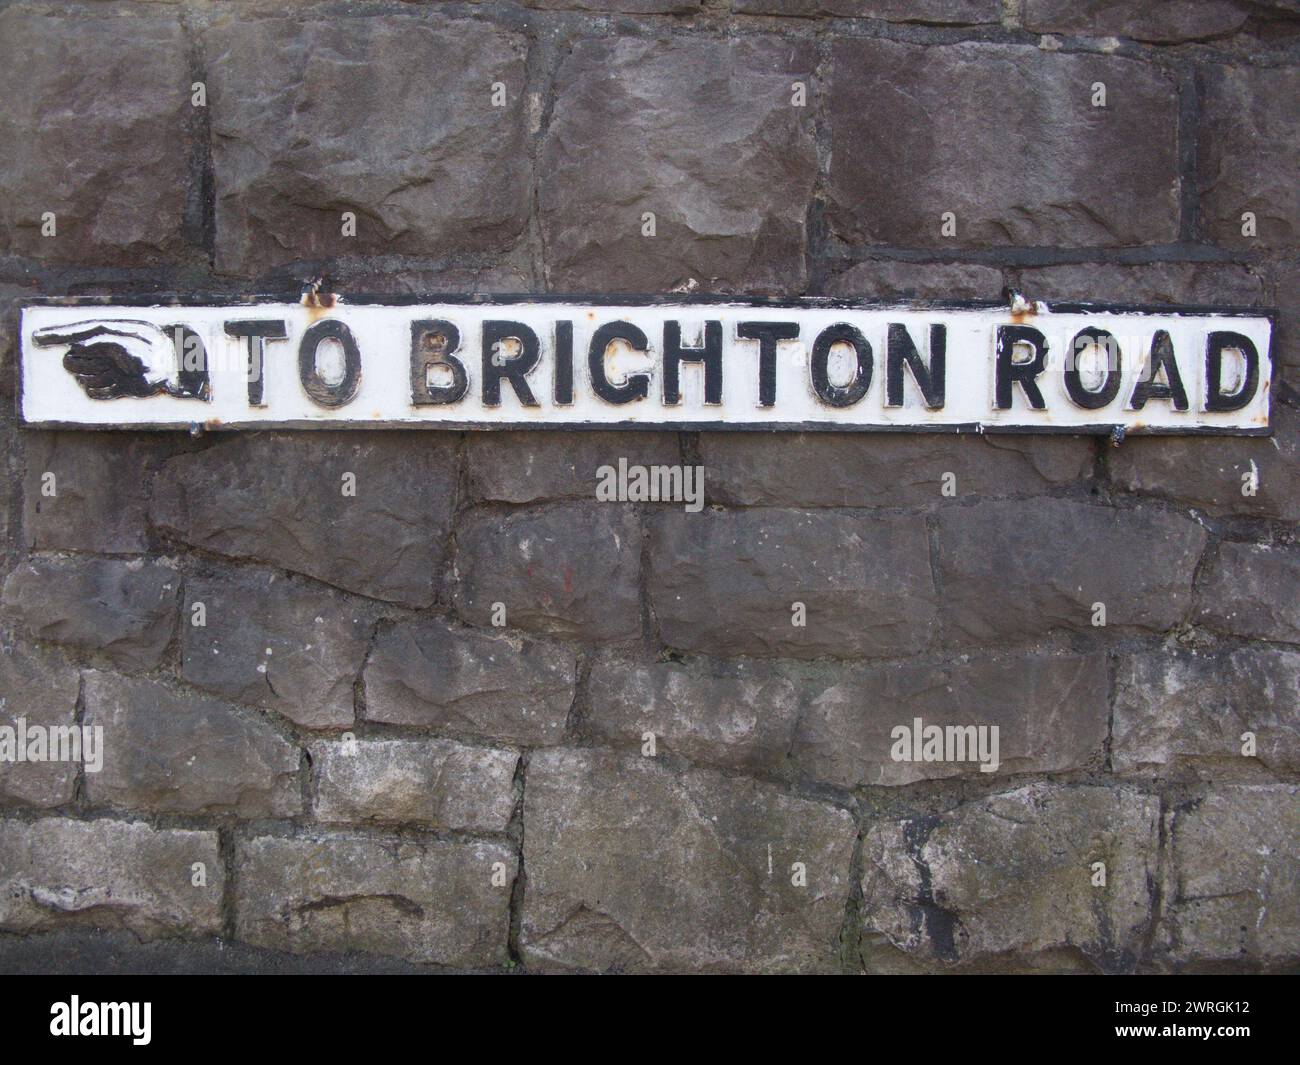 To Brighton road sign, Clevedon road,  Weston Super Mare, North Somerset. No longer there. fingerpost. pointing Stock Photo